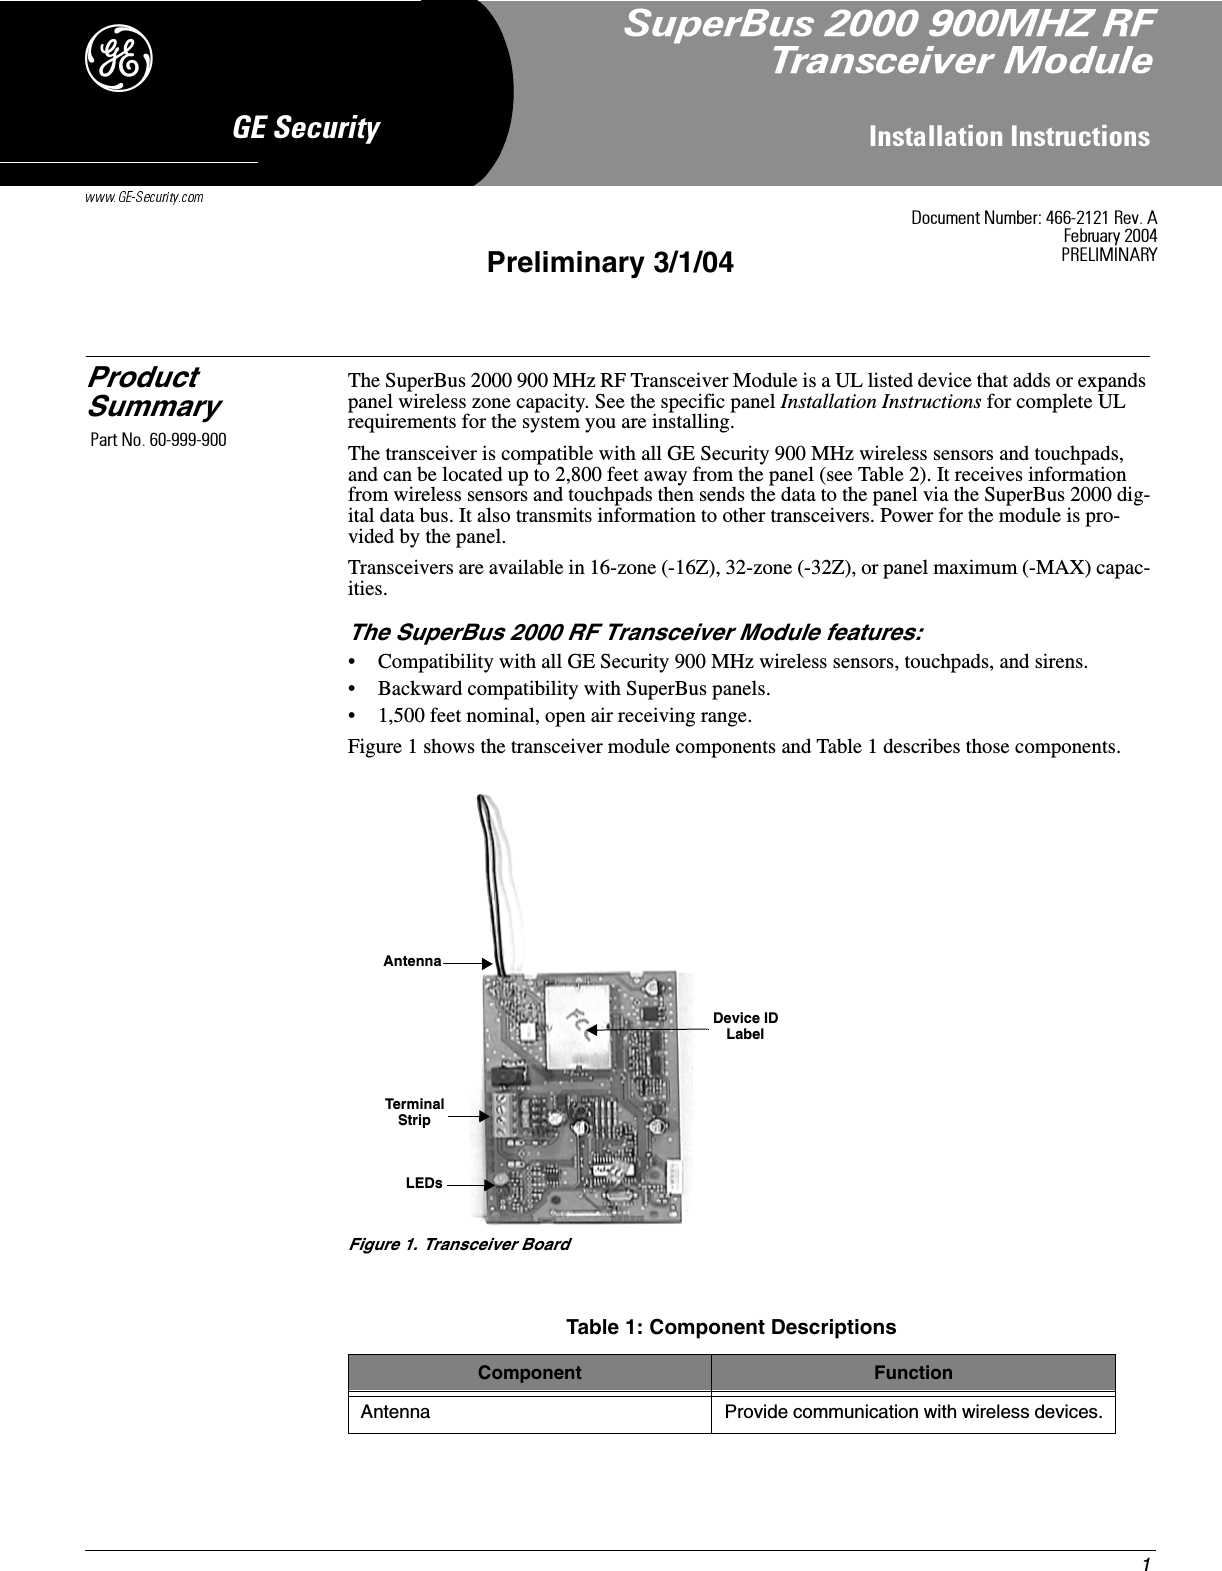 1,QVWDOODWLRQ,QVWUXFWLRQV*(6HFXULW\&apos;Preliminary 3/1/04Product SummaryThe SuperBus 2000 900 MHz RF Transceiver Module is a UL listed device that adds or expands panel wireless zone capacity. See the specific panel Installation Instructions for complete UL requirements for the system you are installing.The transceiver is compatible with all GE Security 900 MHz wireless sensors and touchpads, and can be located up to 2,800 feet away from the panel (see Table 2). It receives information from wireless sensors and touchpads then sends the data to the panel via the SuperBus 2000 dig-ital data bus. It also transmits information to other transceivers. Power for the module is pro-vided by the panel.Transceivers are available in 16-zone (-16Z), 32-zone (-32Z), or panel maximum (-MAX) capac-ities.The SuperBus 2000 RF Transceiver Module features:• Compatibility with all GE Security 900 MHz wireless sensors, touchpads, and sirens.• Backward compatibility with SuperBus panels.• 1,500 feet nominal, open air receiving range.Figure 1 shows the transceiver module components and Table 1 describes those components.Figure 1. Transceiver BoardTable 1: Component DescriptionsComponent FunctionAntenna Provide communication with wireless devices.AntennaLEDsTerminalStripDevice IDLabel&apos;RFXPHQW1XPEHU5HY$)HEUXDU\35(/,0,1$5&lt;6XSHU%XV0+=5)7UDQVFHLYHU0RGXOH3DUW1R